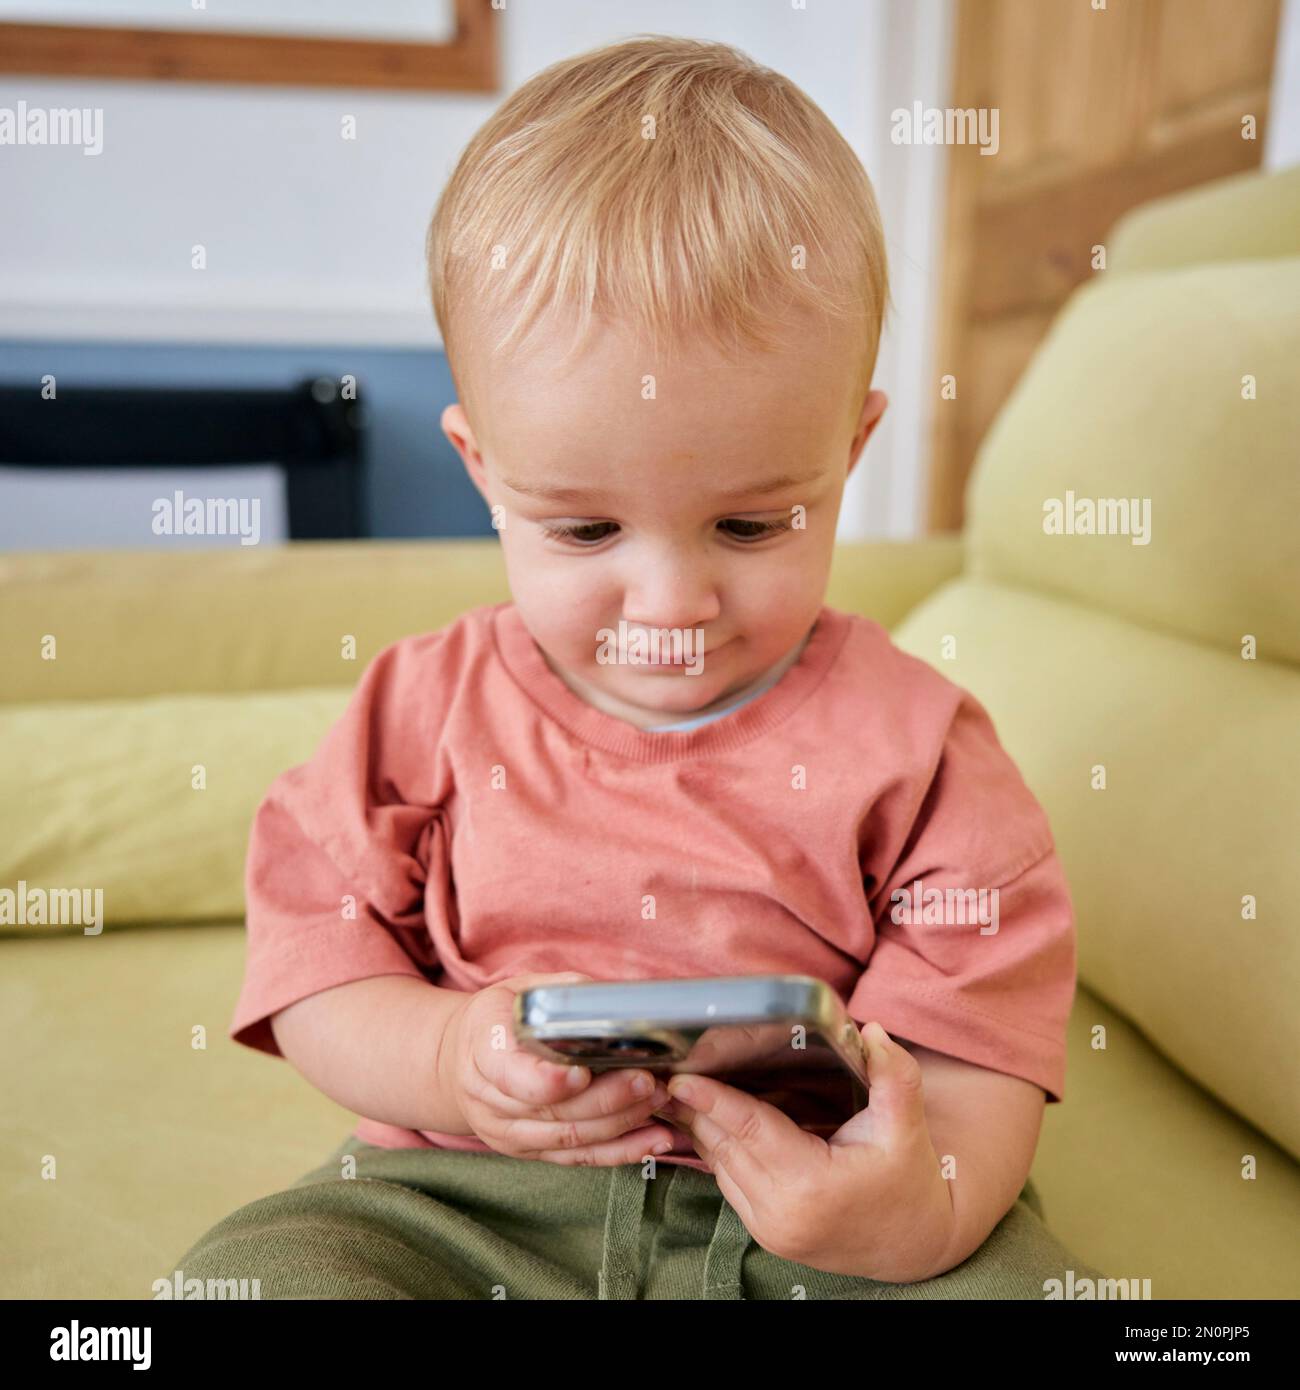 Toddler holding smart phone with animated expression indoors Stock Photo